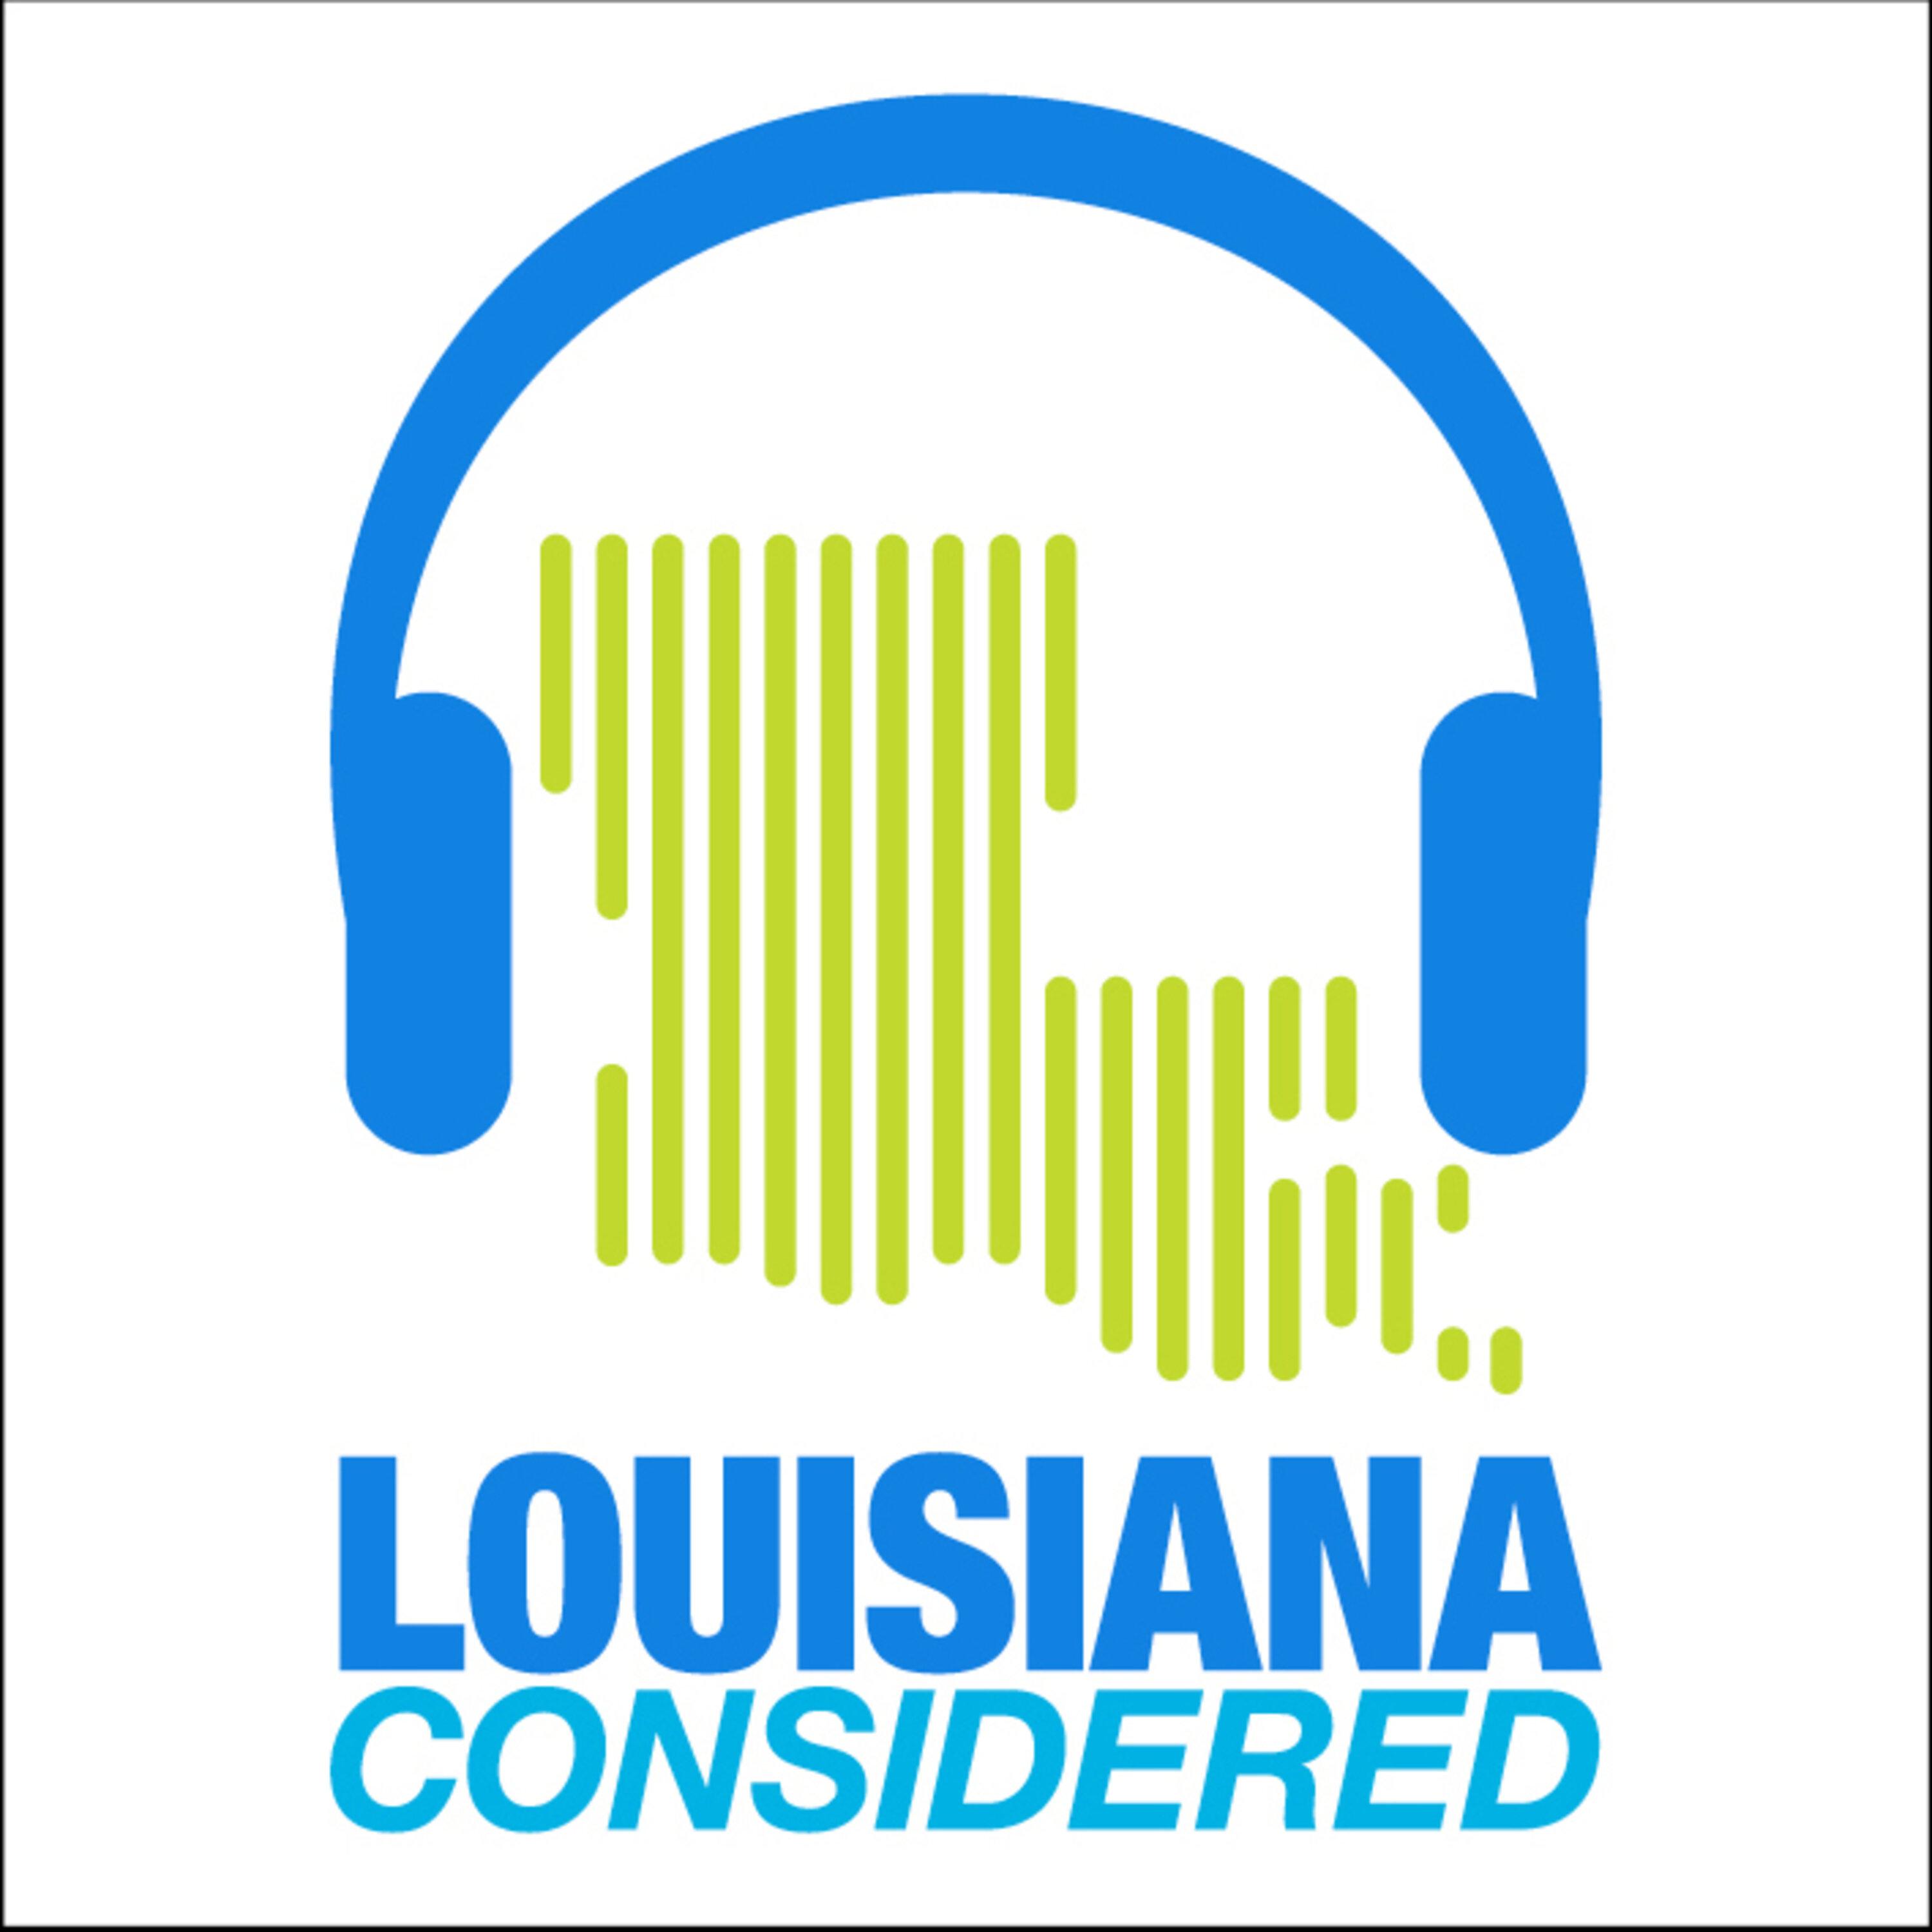 Thumbnail for "Louisiana Considered: LSU Faculty Plead For COVID-19 Safety Measures In Classrooms, State Hospitals Consider Rationing Patient Care, Vaccinations Increase As Delta Variant Spreads, AG Jeff Landry Advises Staff On How To Circumvent K-12 School Mask Requirements".